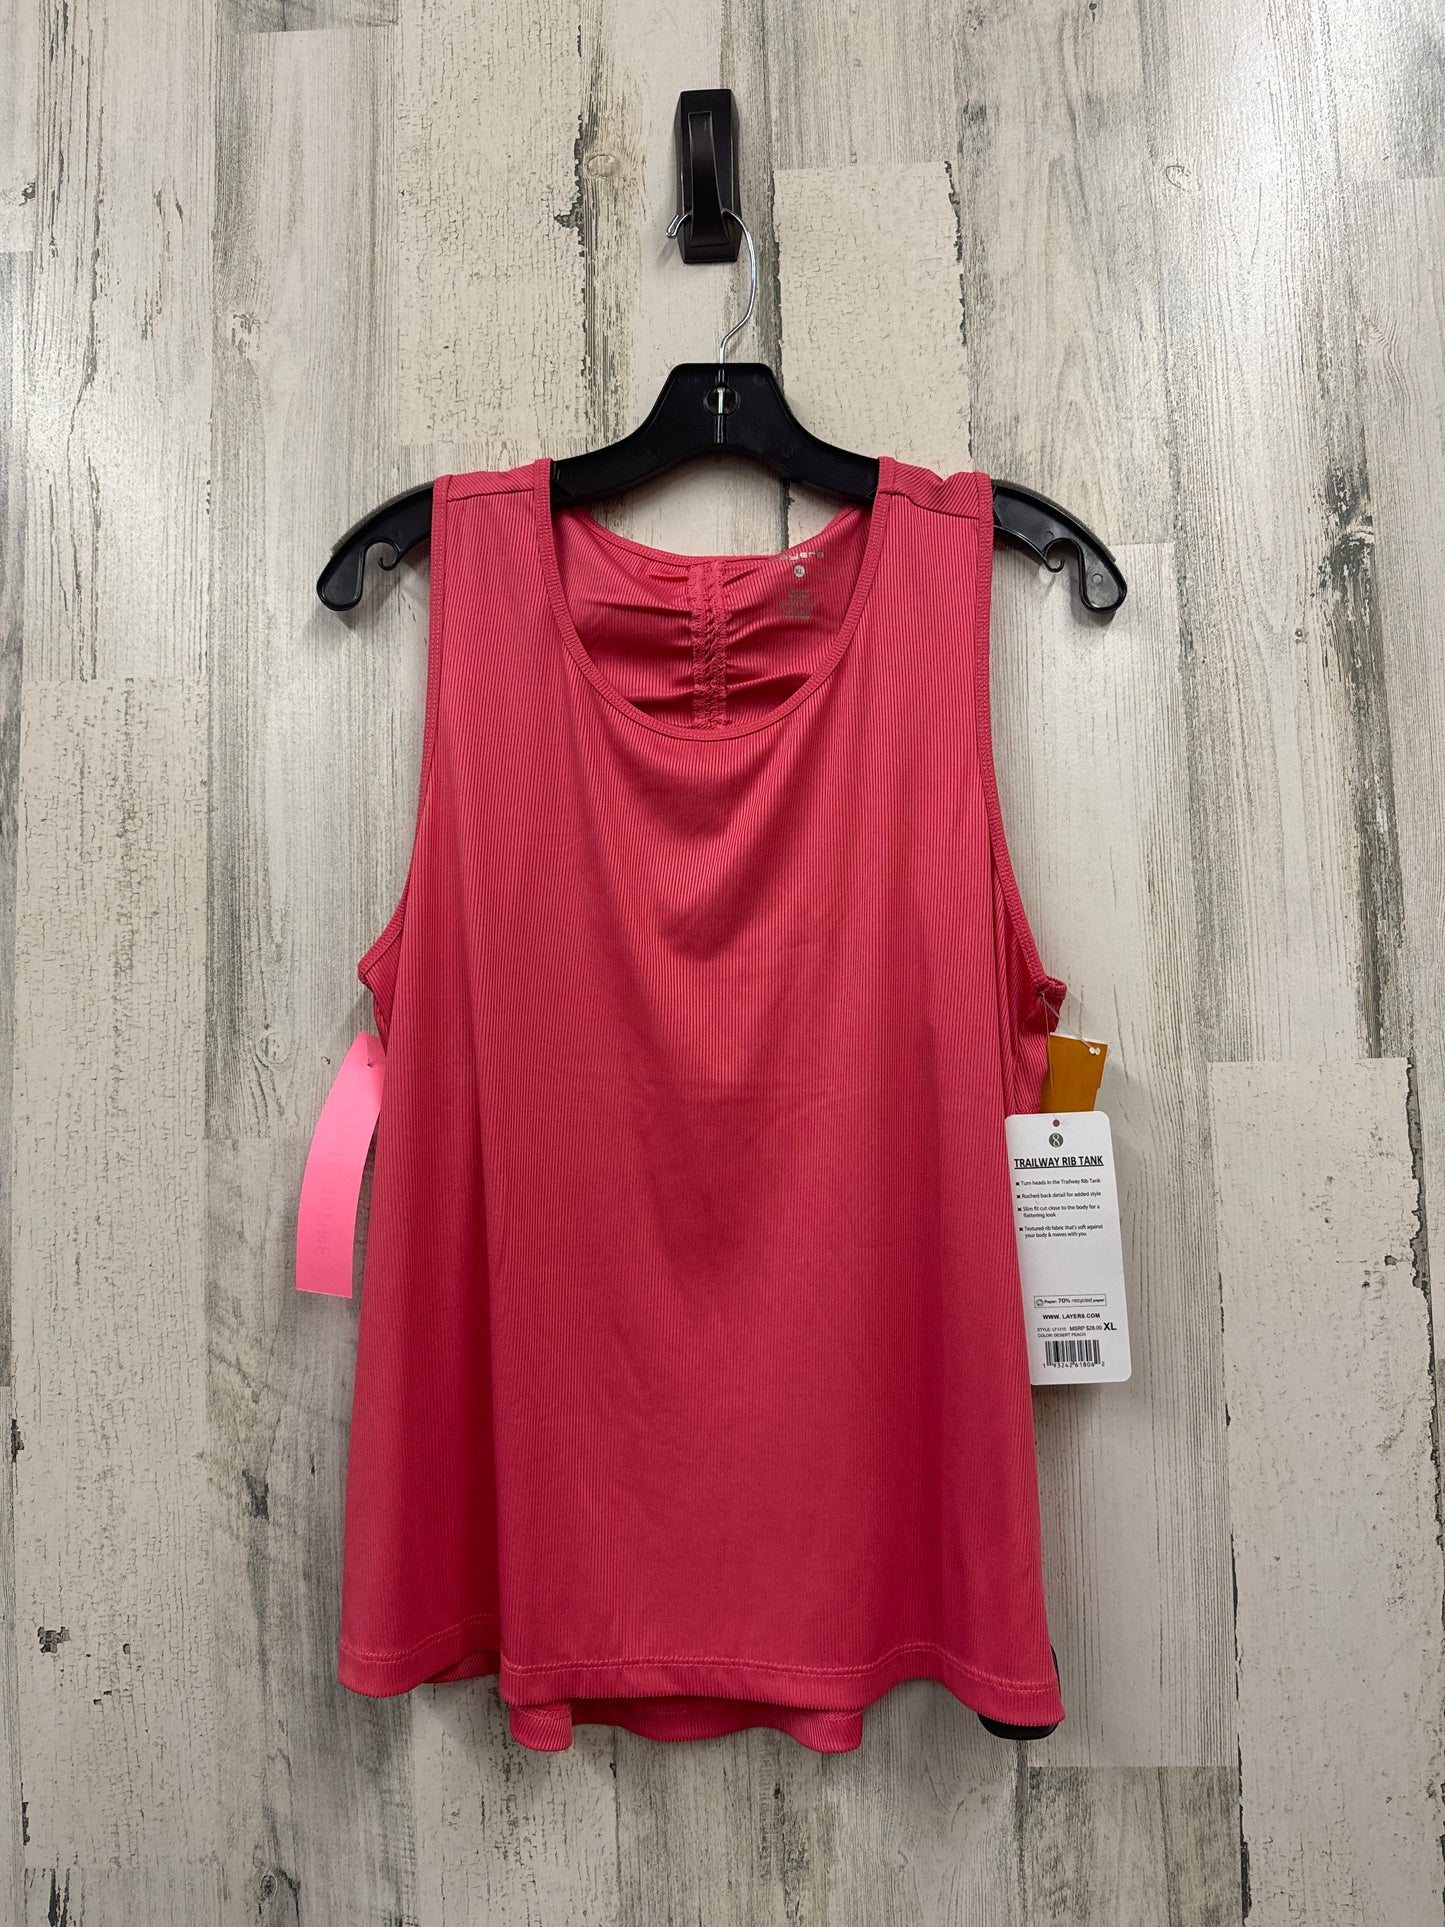 Athletic Tank Top By Layer 8  Size: Xl